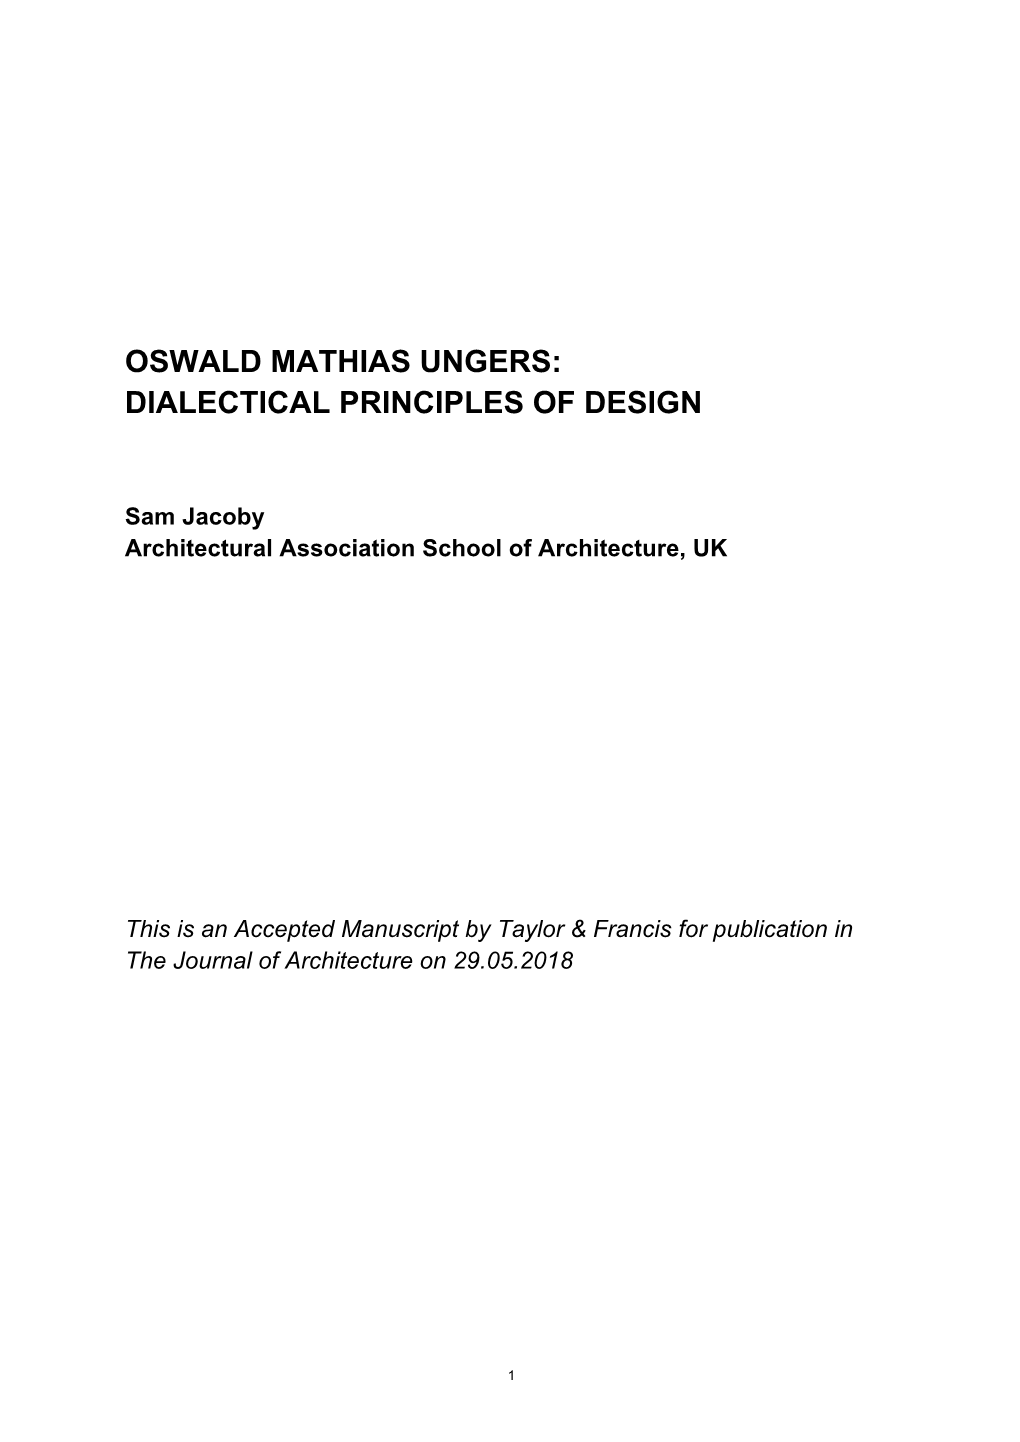 Oswald Mathias Ungers: Dialectical Principles of Design